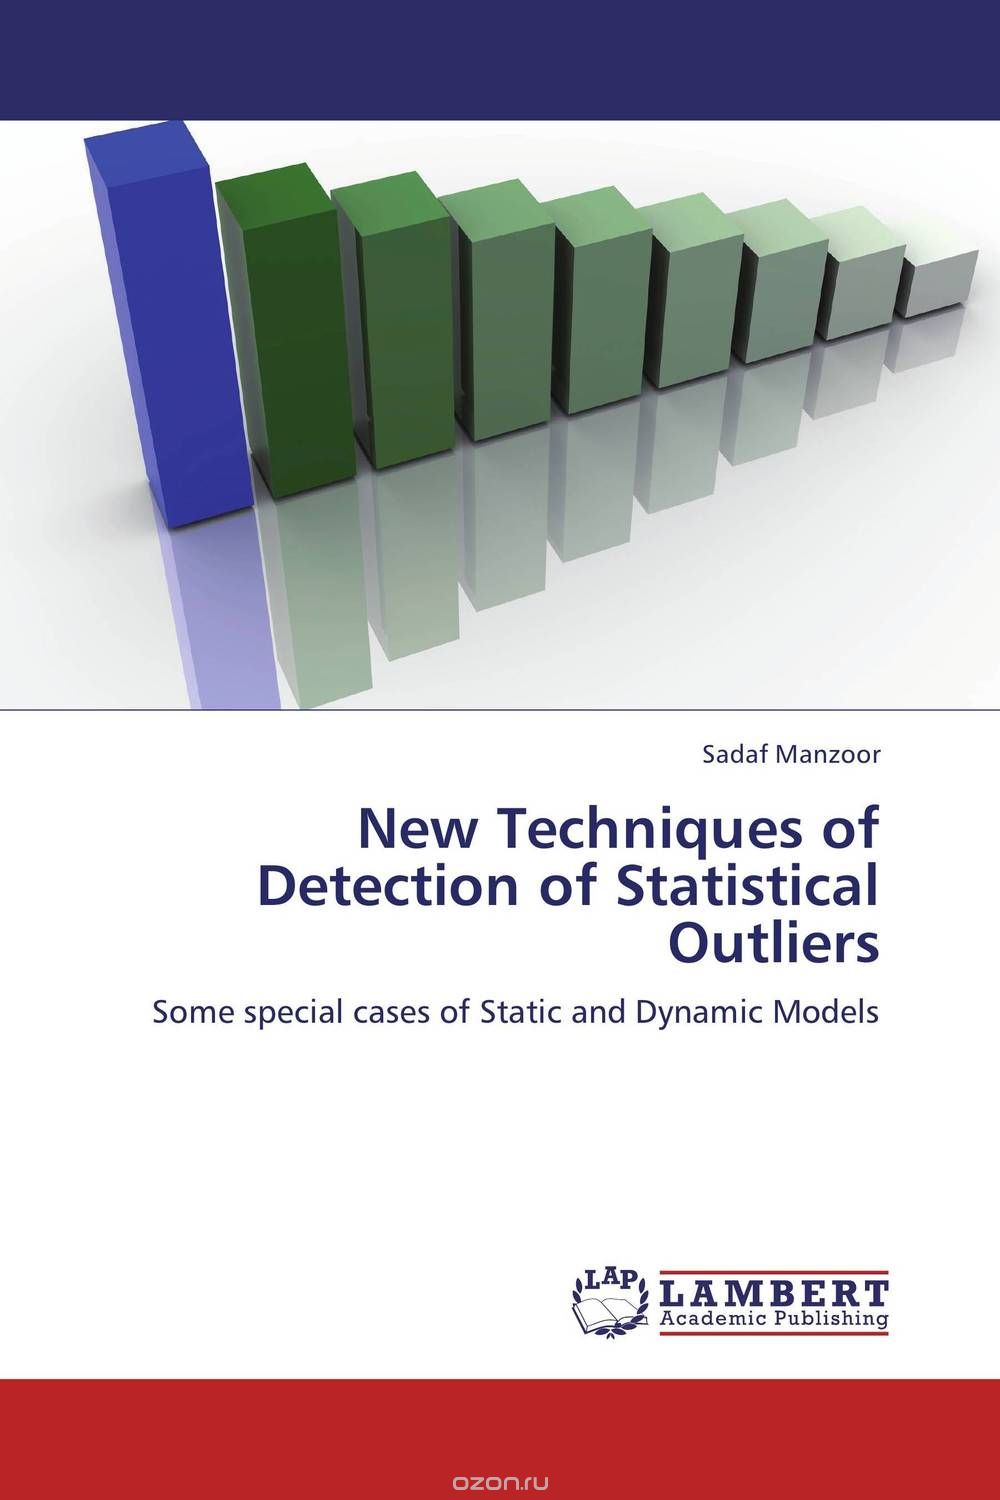 Скачать книгу "New Techniques of Detection of Statistical Outliers"